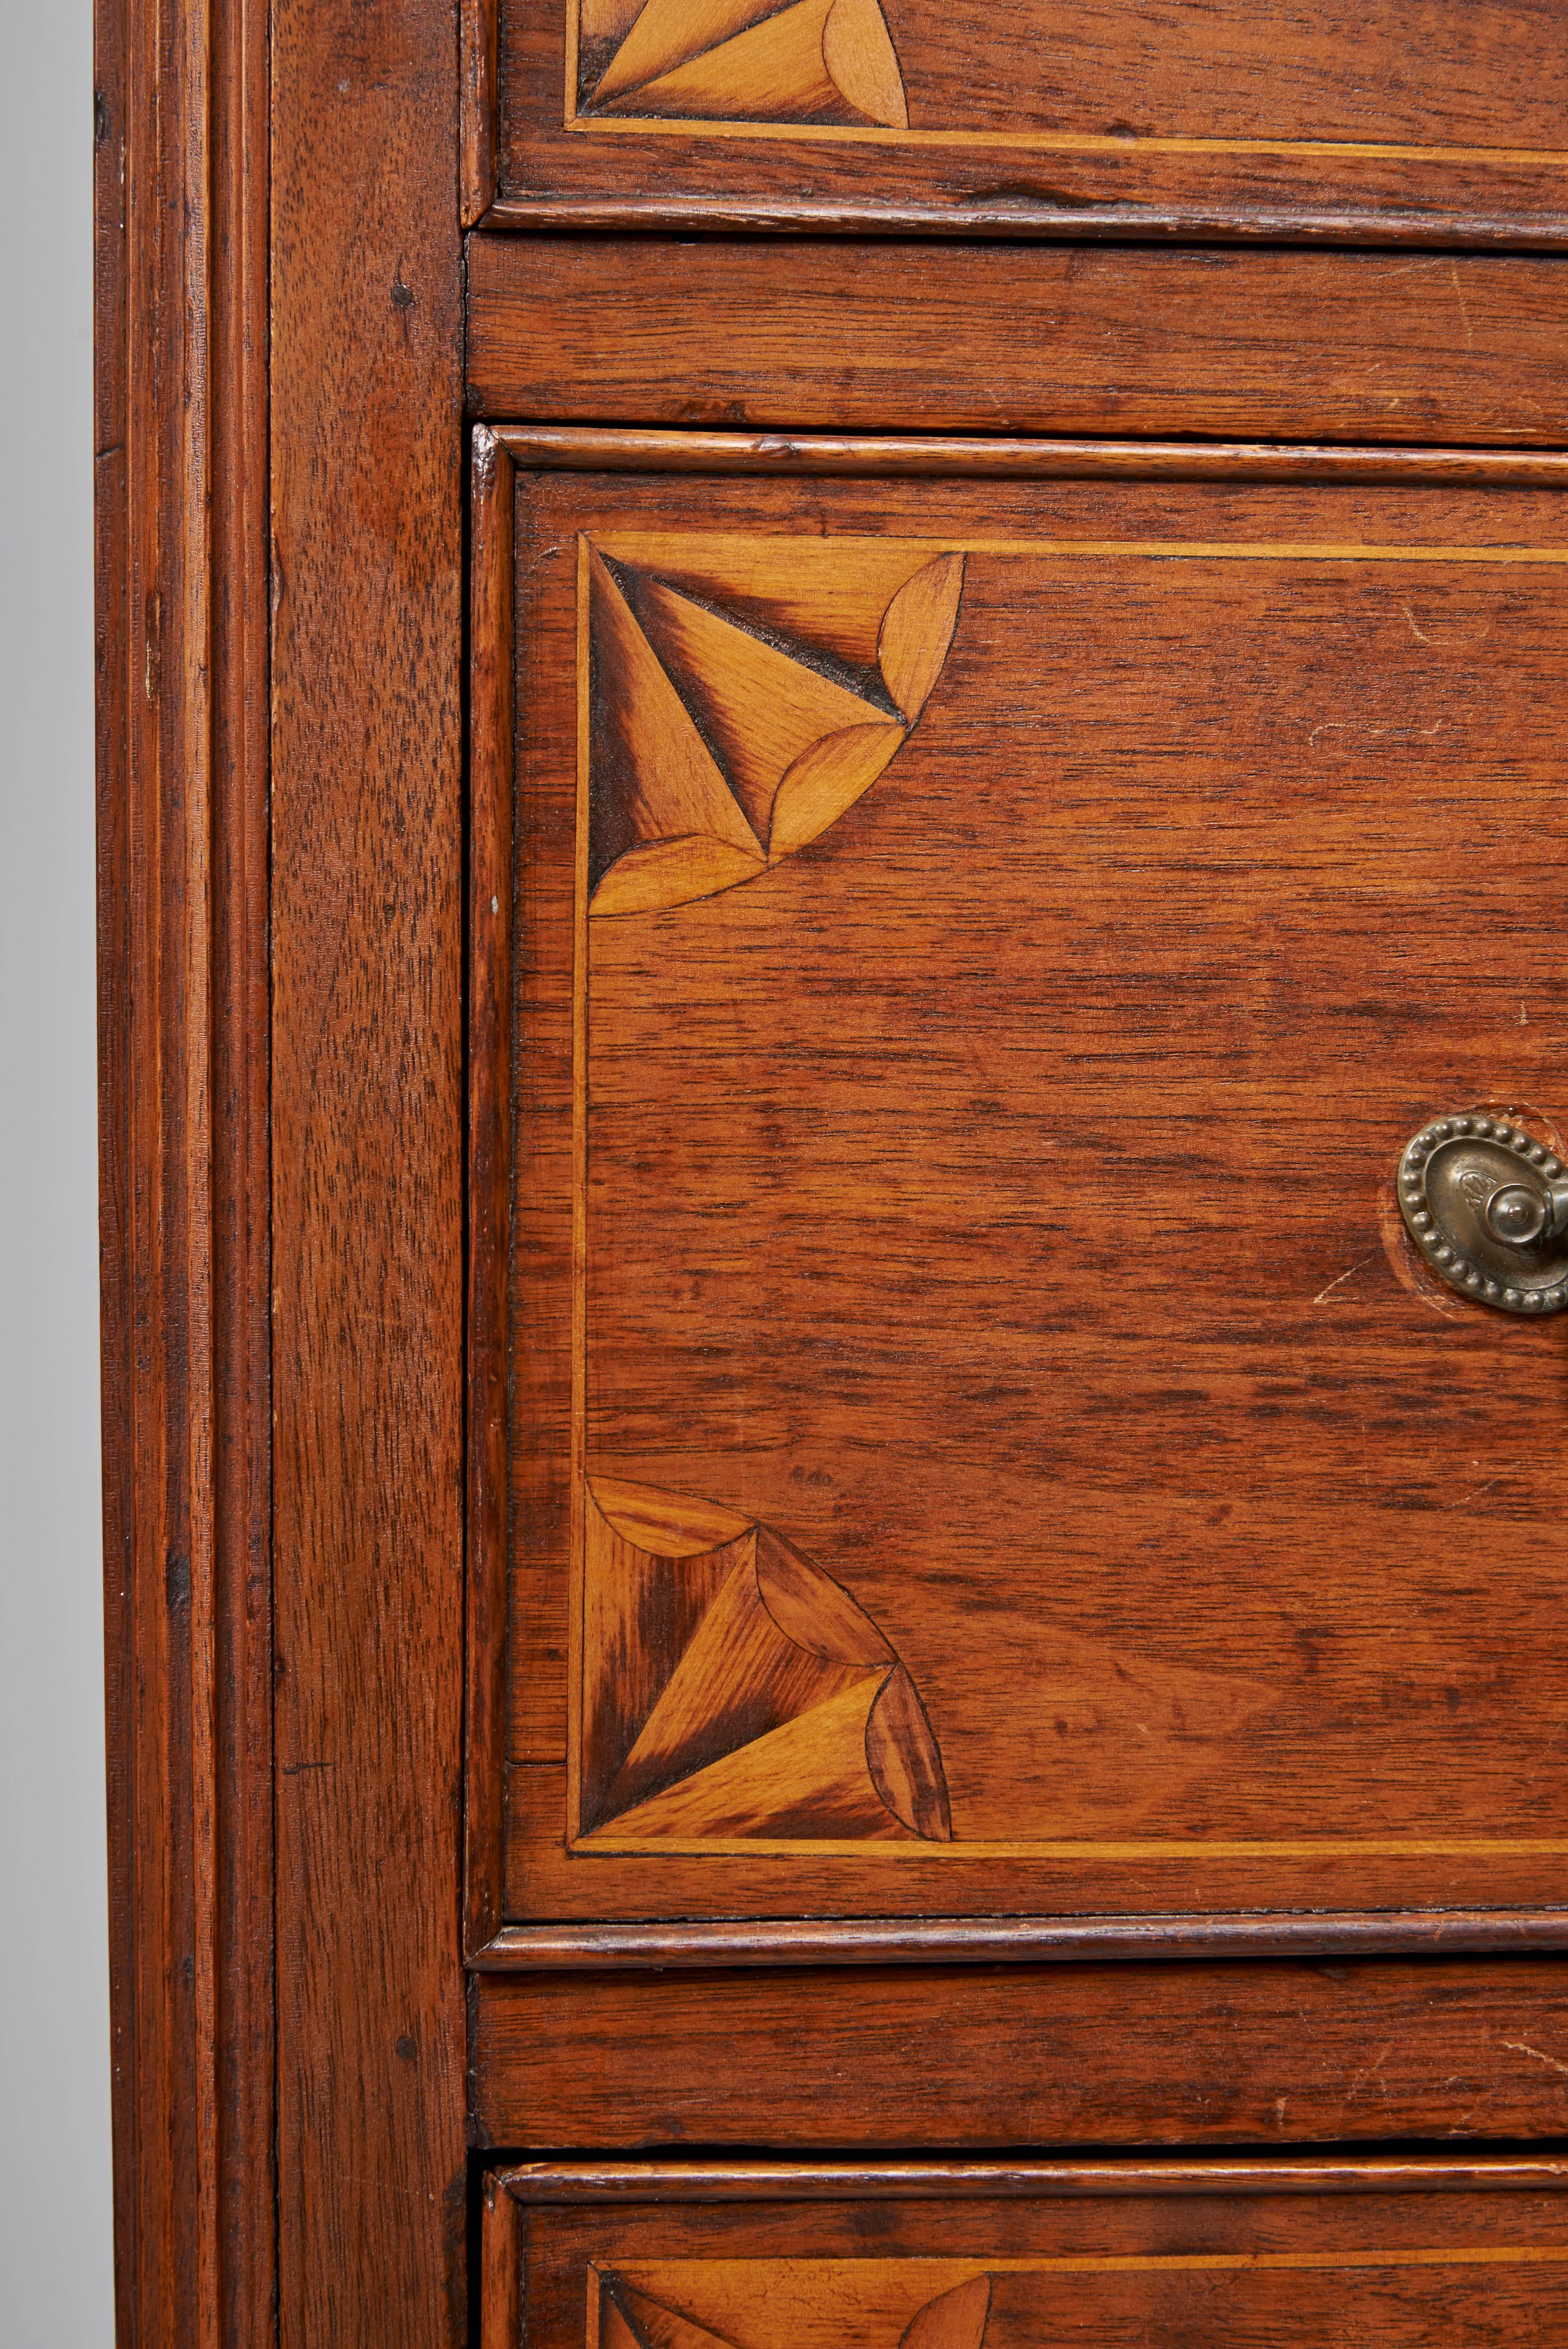 Walnut Chippendale high chest of drawers corners of drawers inlaid with fan designs nice drawer arrangement bale and rosette brasses fluted corners terminating in ogee feet.